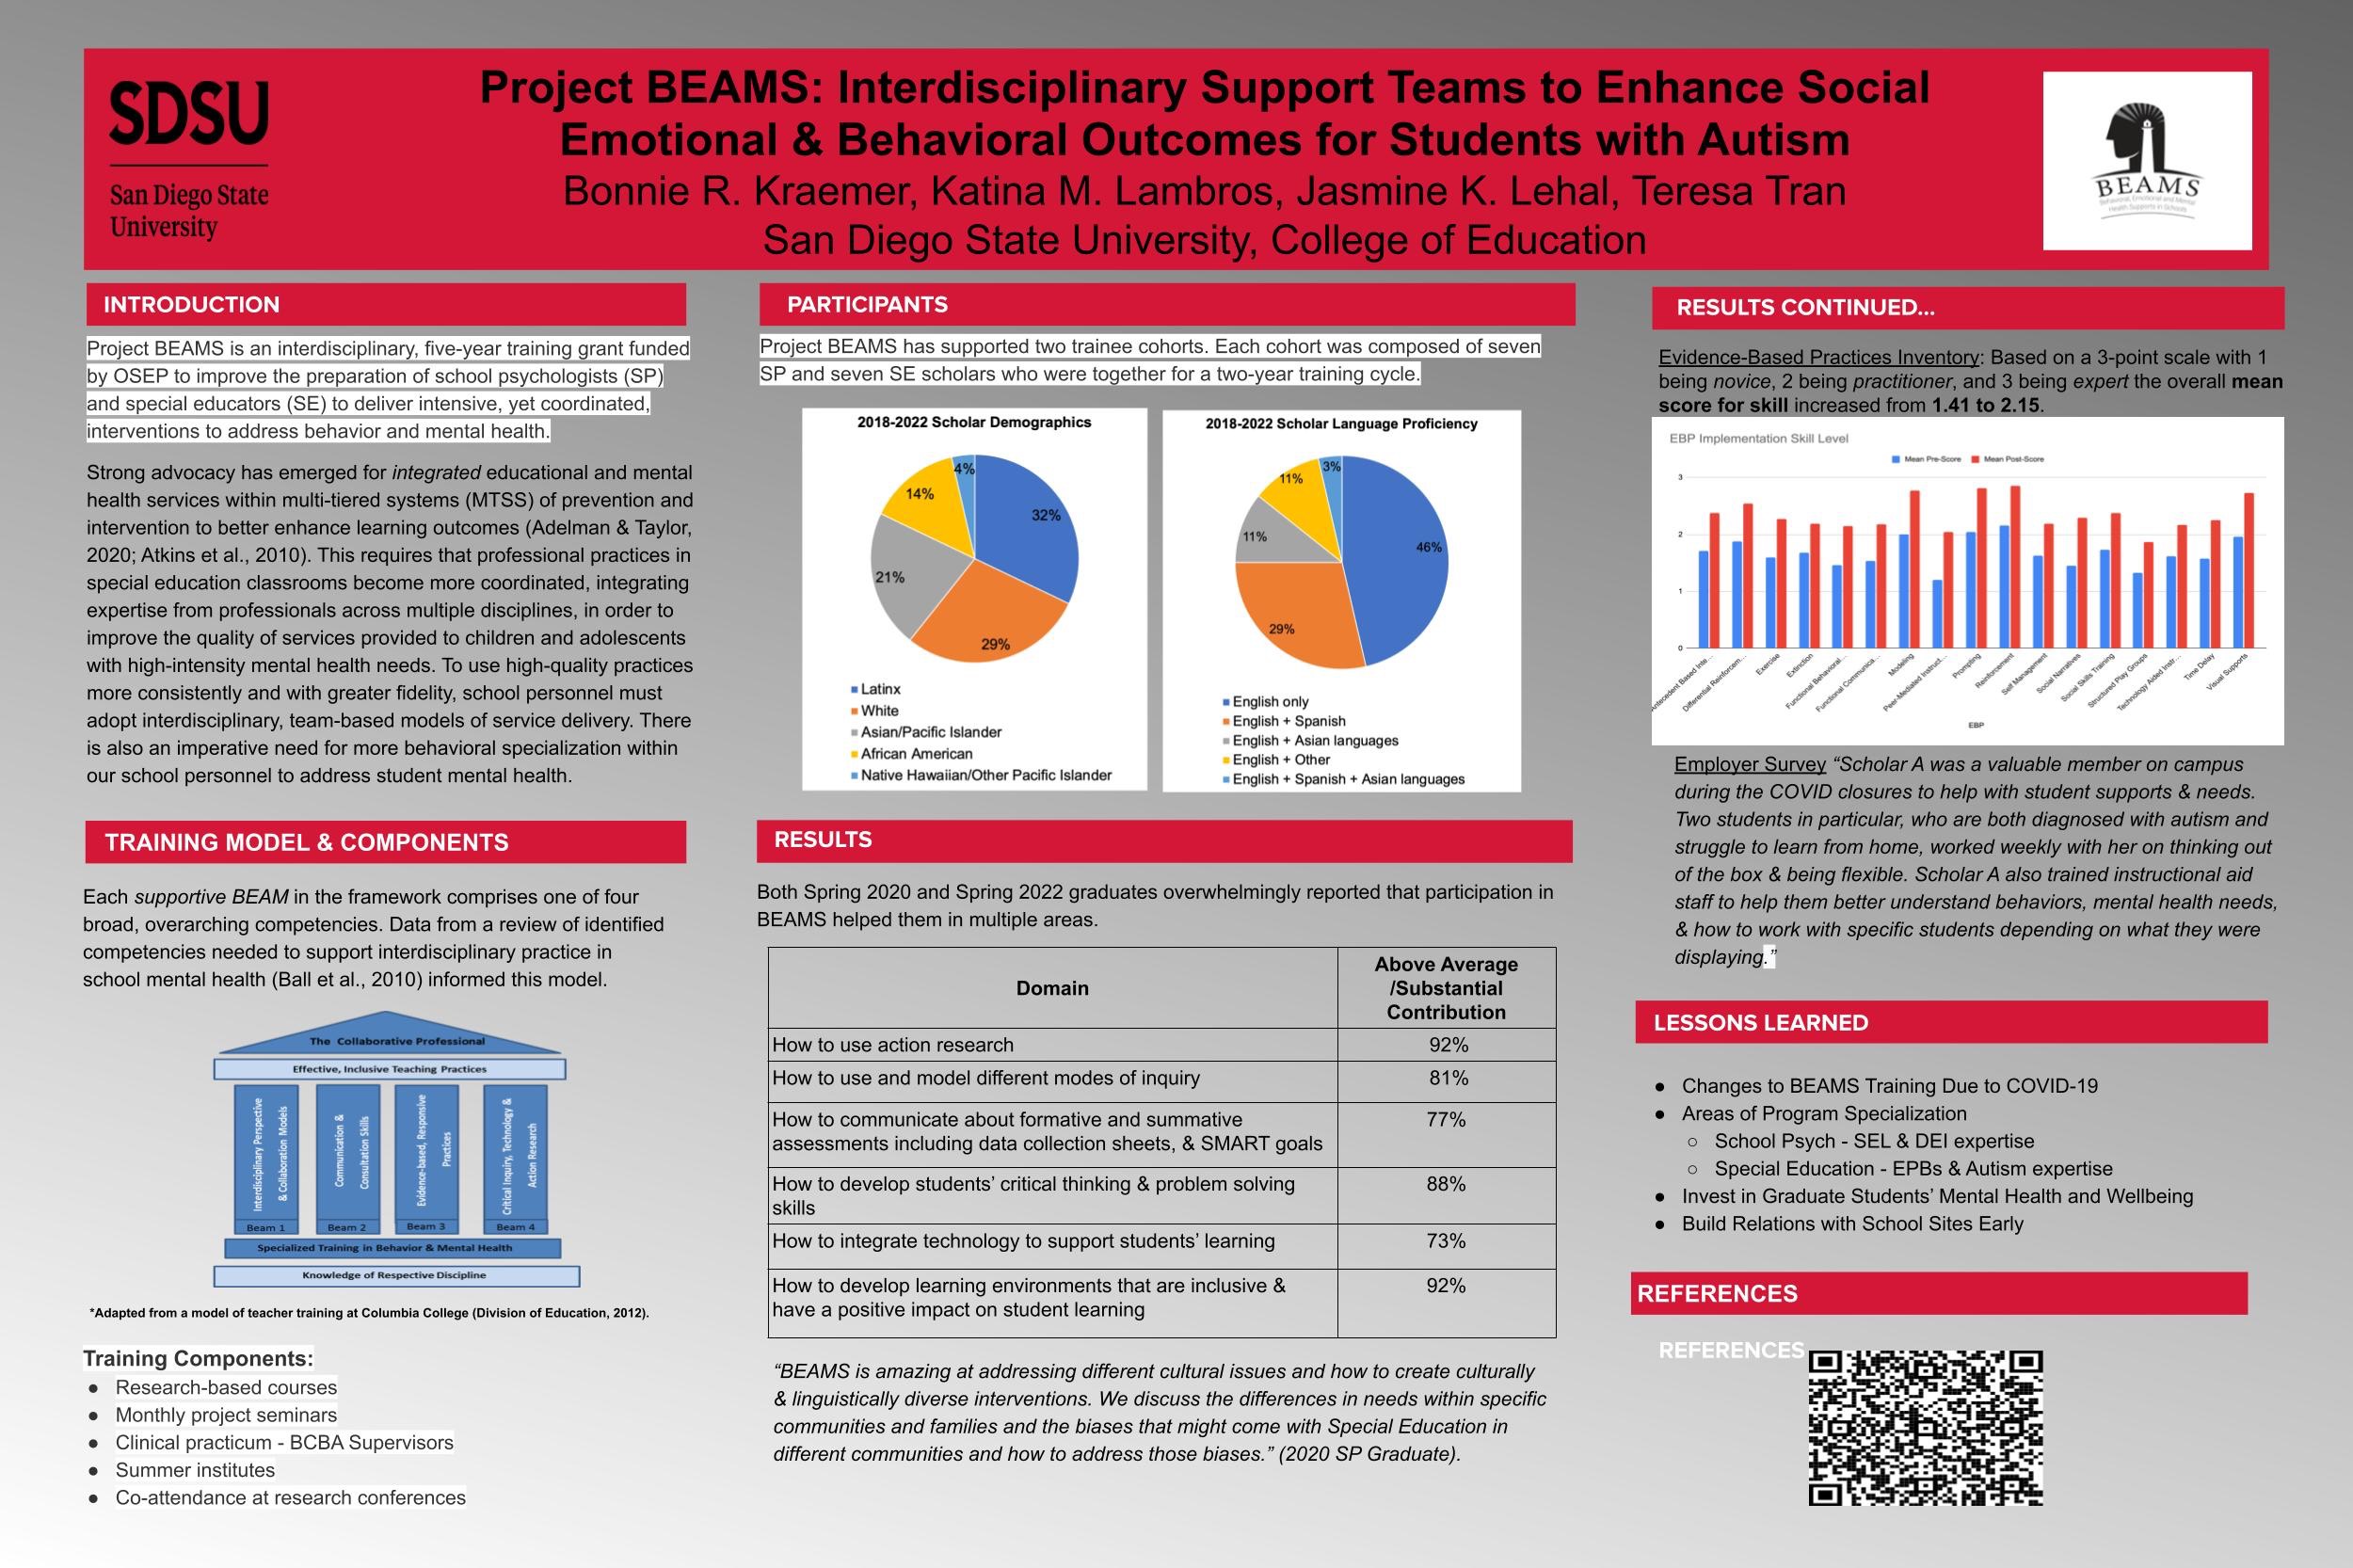 Project BEAMS: Interdisciplinary Support Teams to Enhance Social Emotional & Behavioral Outcomes for Students with Autism